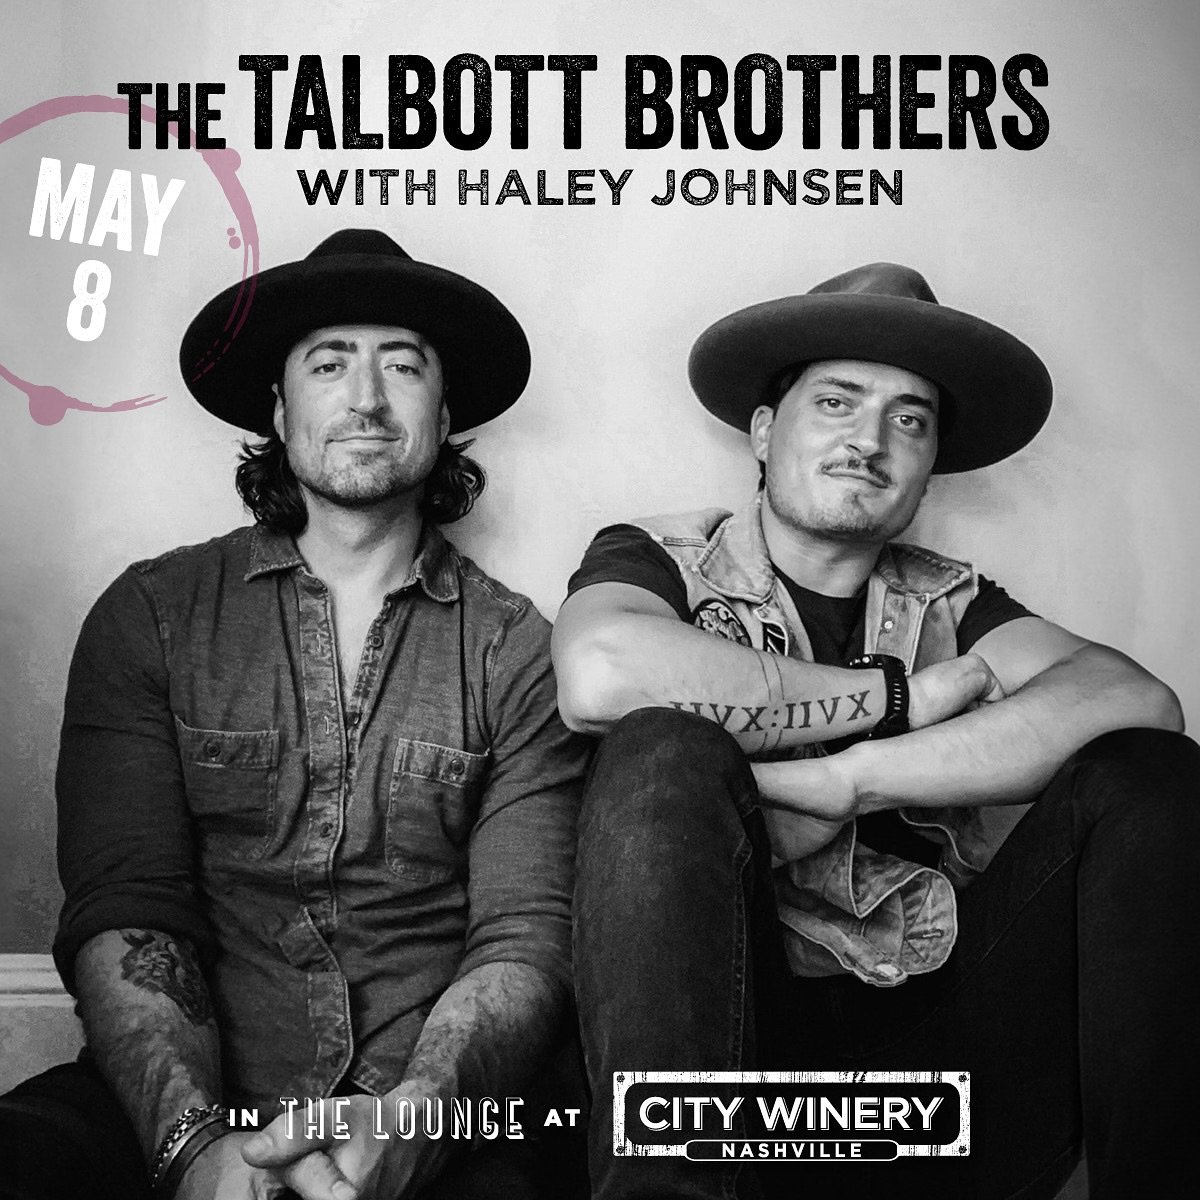 Nashville! We&rsquo;re playin @citywinerynsh this Wednesday 5/8 and we&rsquo;d love to see you. There are still a few tickets left #citywinery #nashville #thetalbottbrothers #singersongwriter